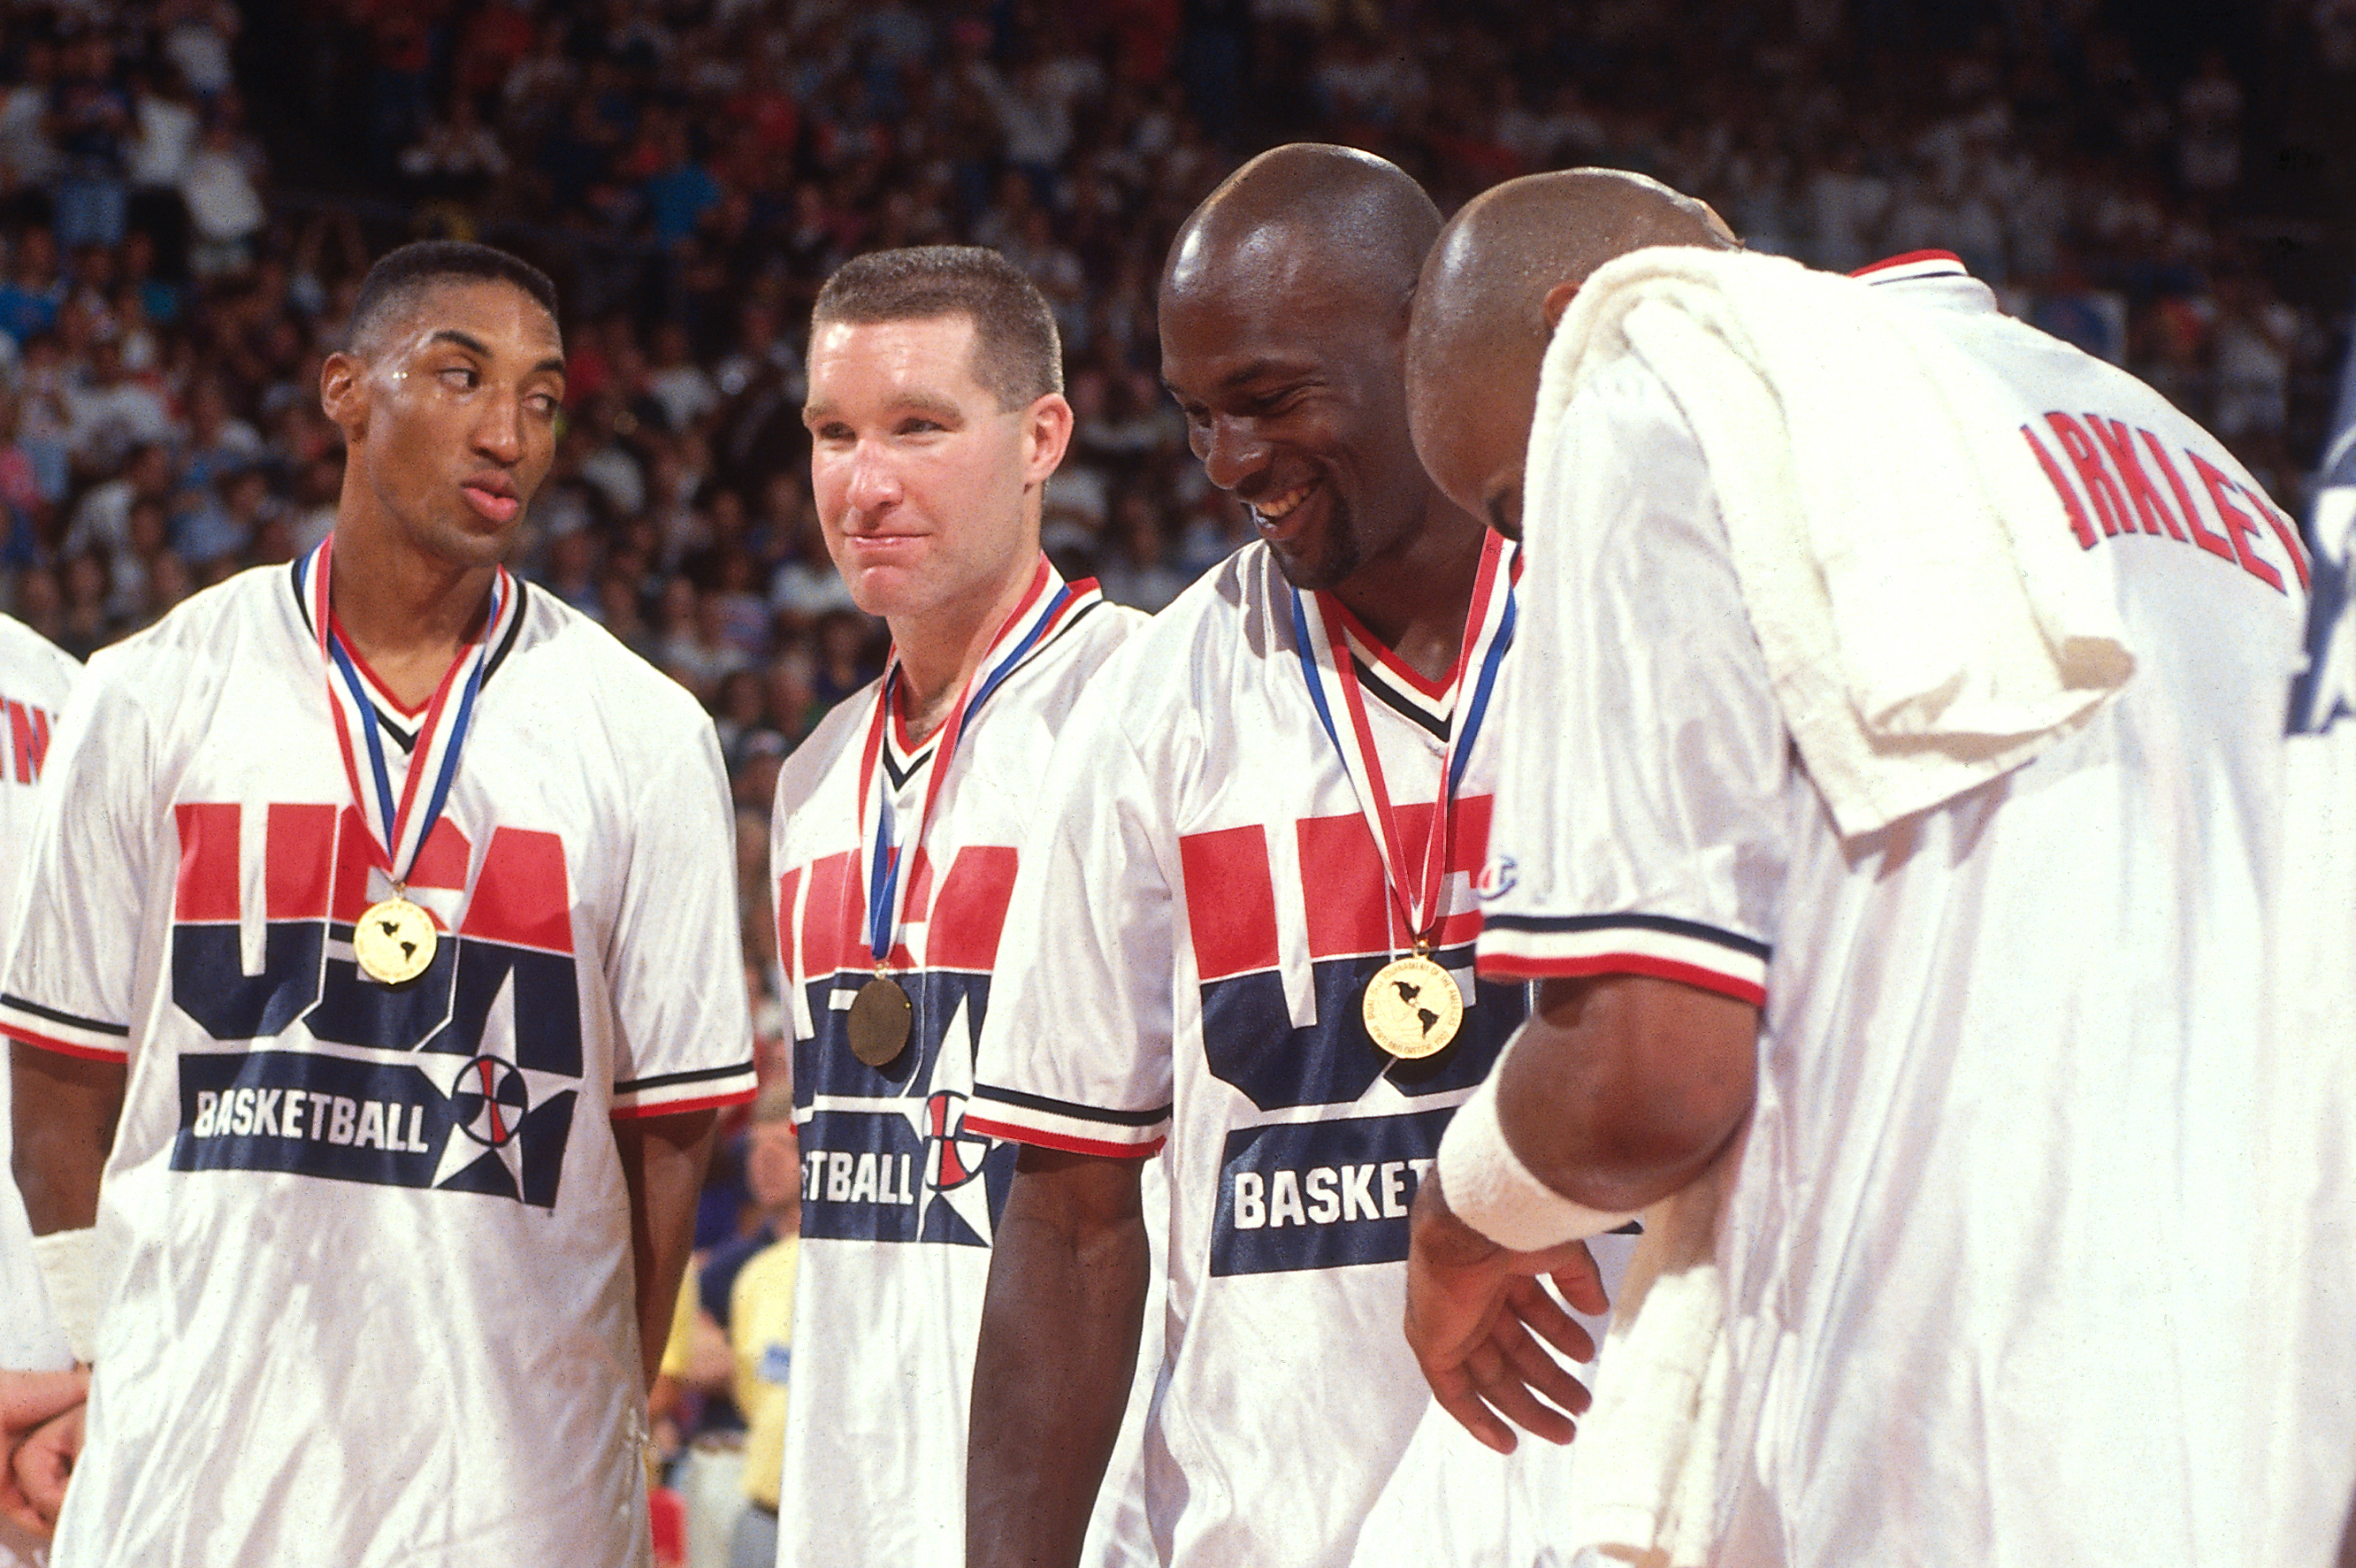 Team USA Since 1992 - Sports Illustrated